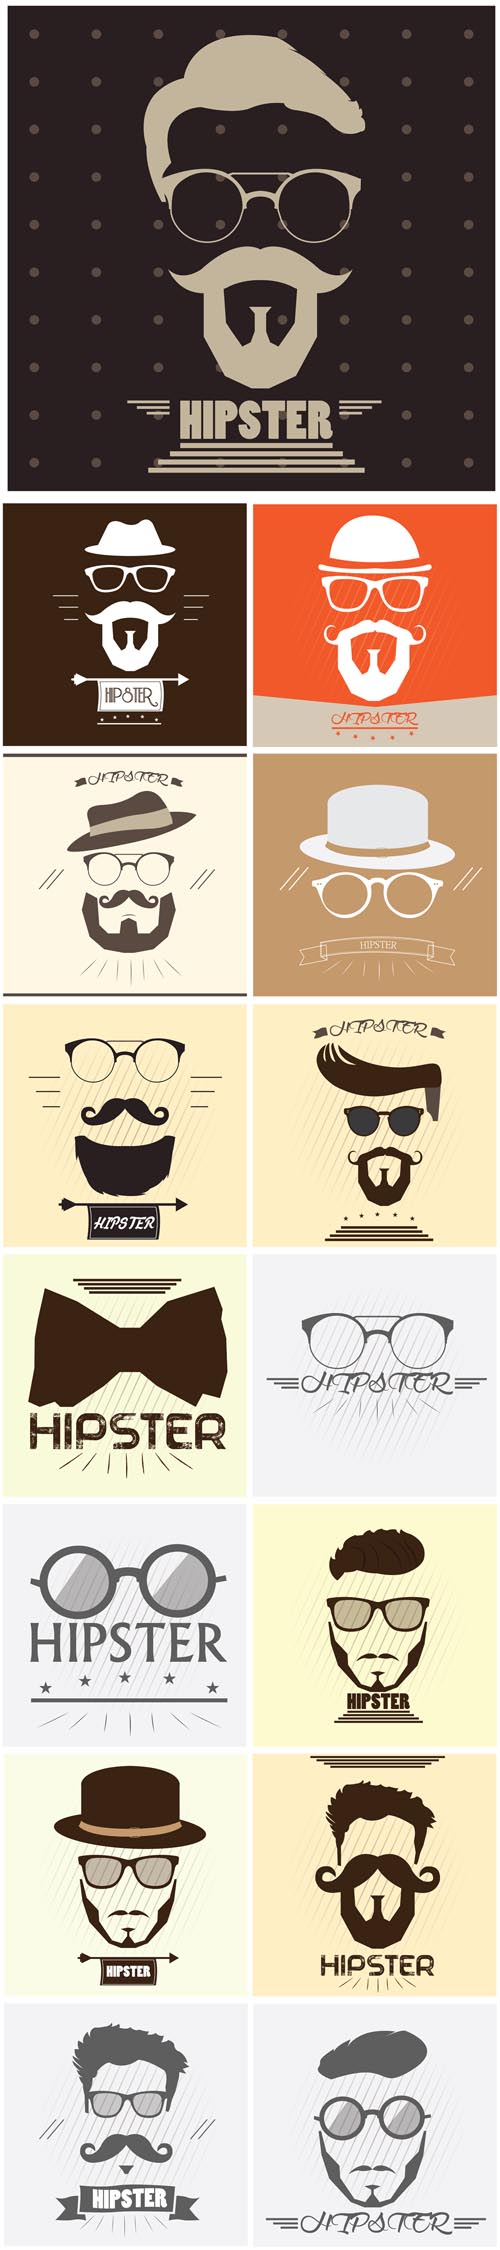 Vectors - Hipster Icons